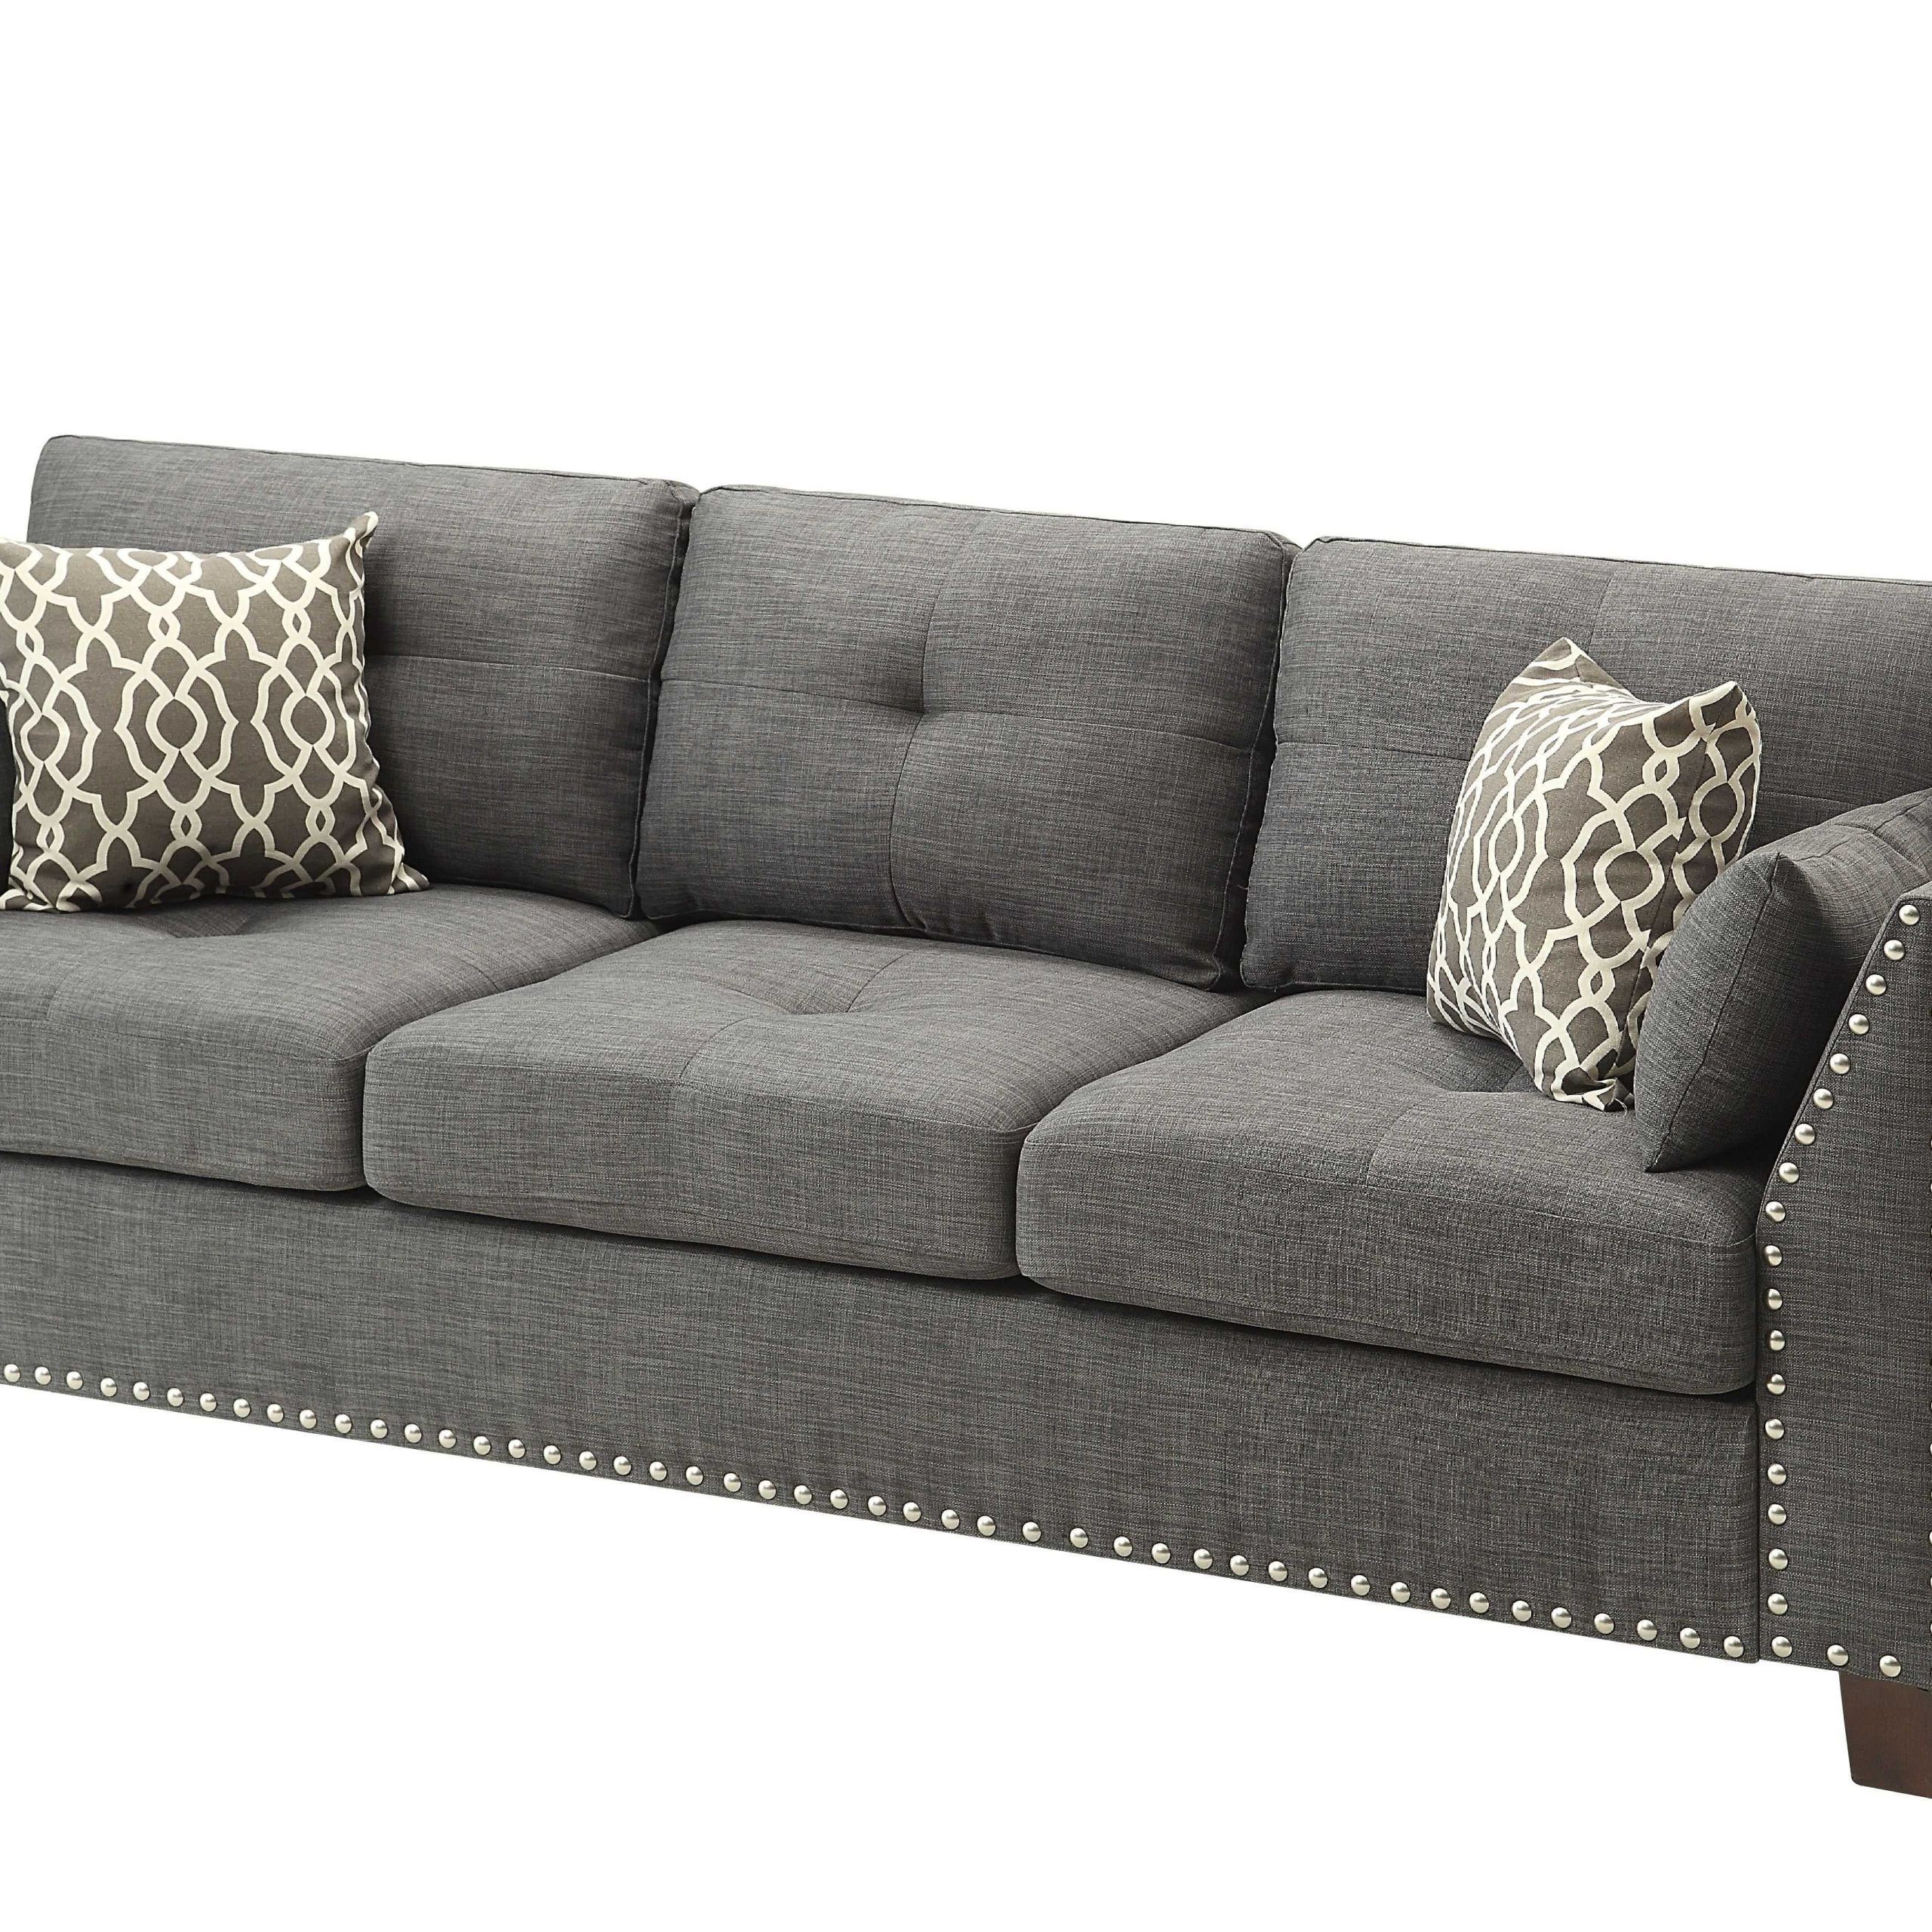 Sofa In Light Charcoal Linen – Linen, Eucalyptus, Plywood, Foam Throughout Trendy Light Charcoal Linen Sofas (View 5 of 15)